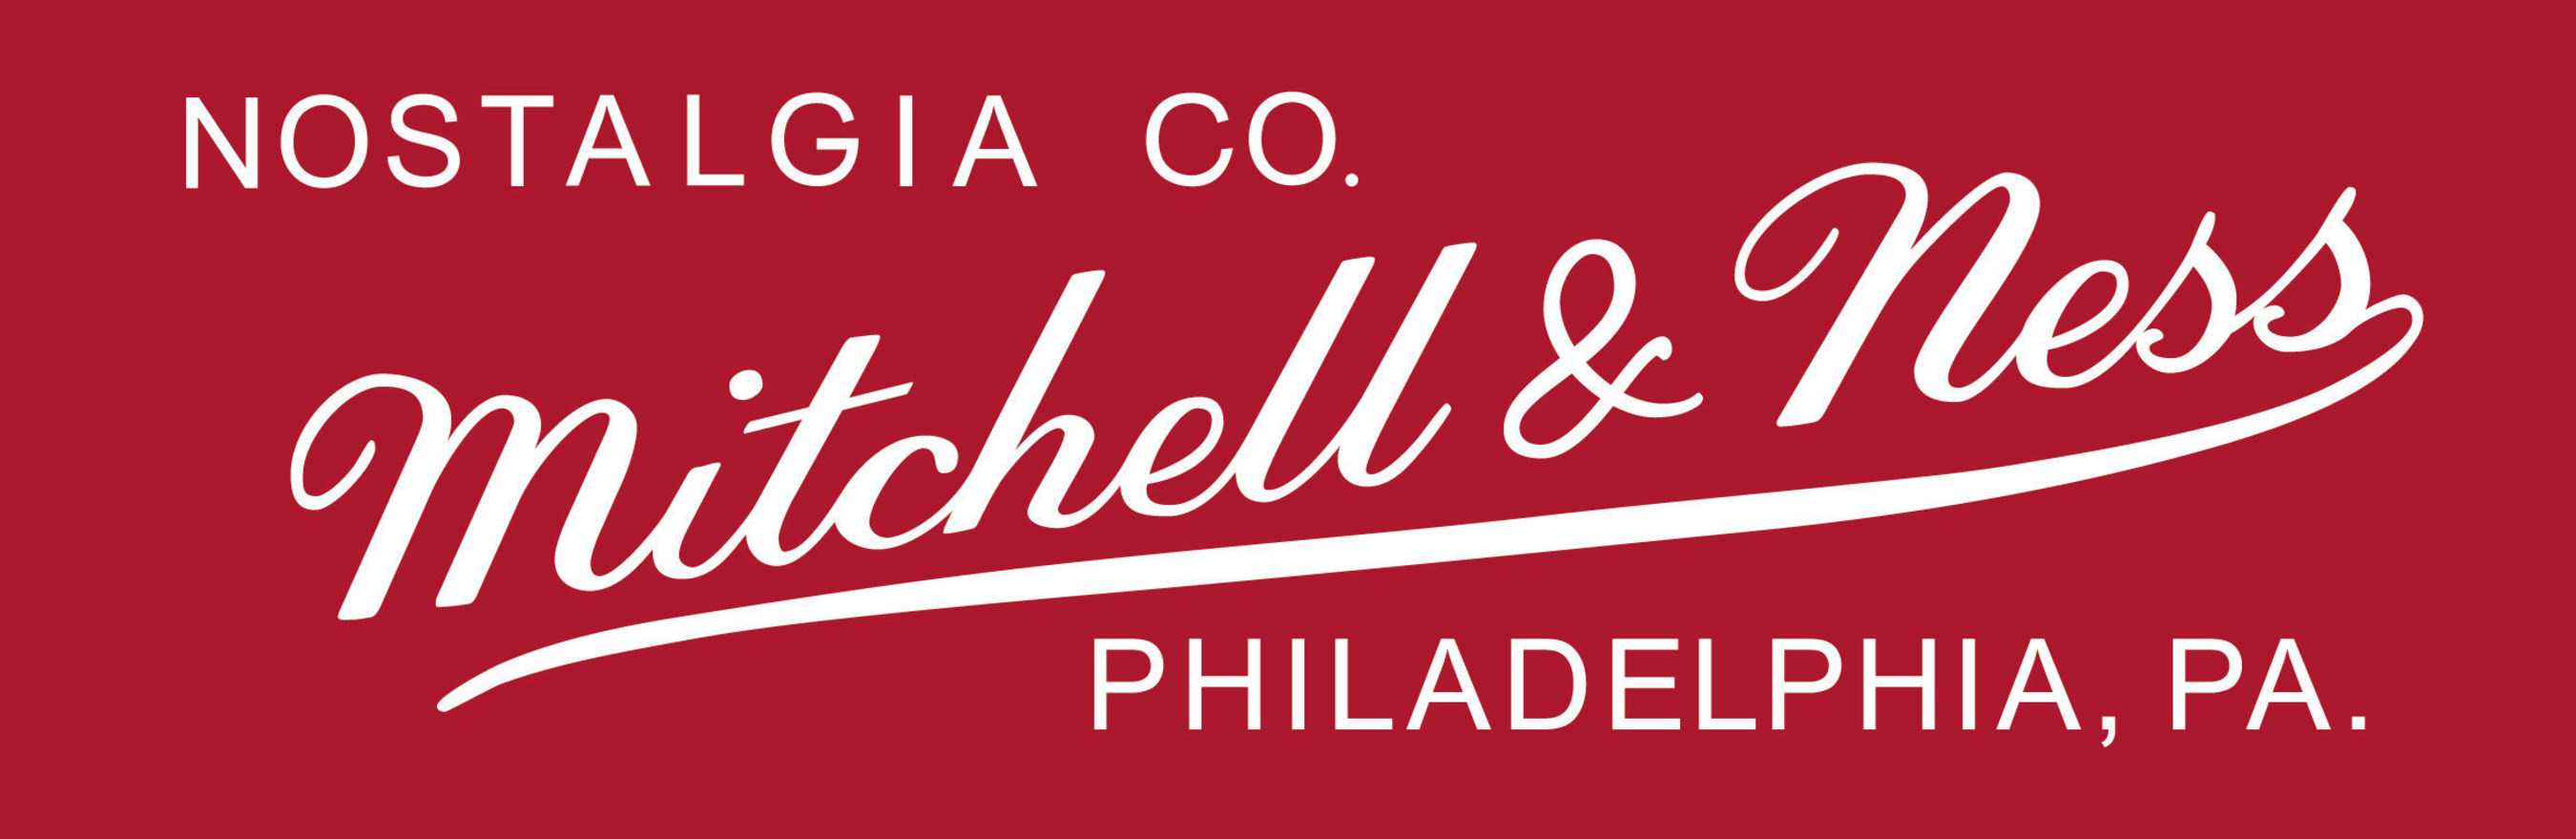 Juggernaut Capital Partners and Kevin Wulff Acquire Mitchell & Ness Assets  from Adidas Group